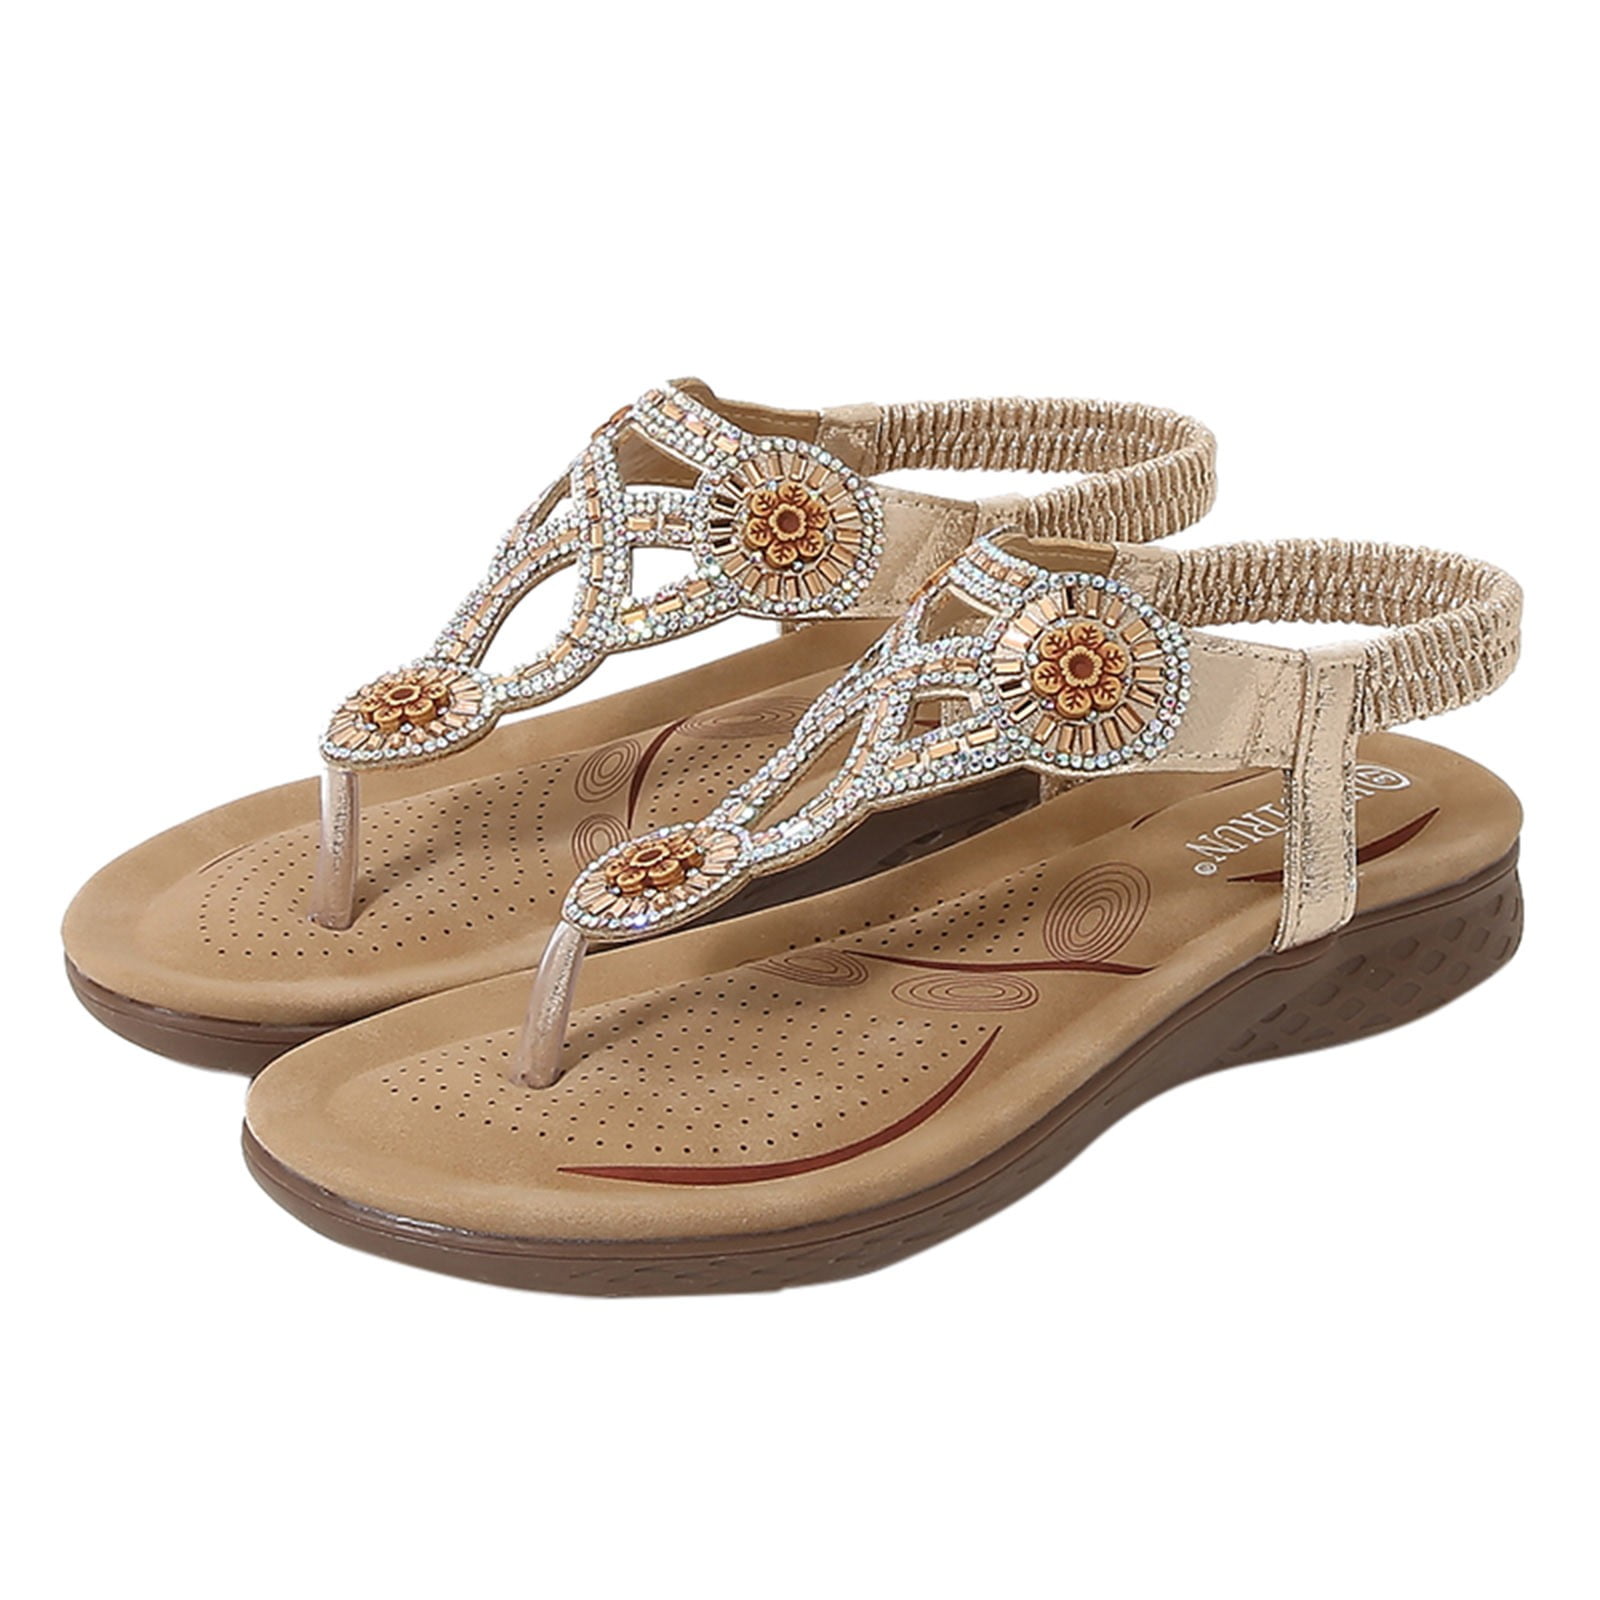  XG-ZD Women's Flat Sandals Toe Post Sandal Rhinestone Sandals  Summer Casual Beach Shoes Comfy Low Sandals Soft Non-Slip Sole,Gold,41 :  Clothing, Shoes & Jewelry